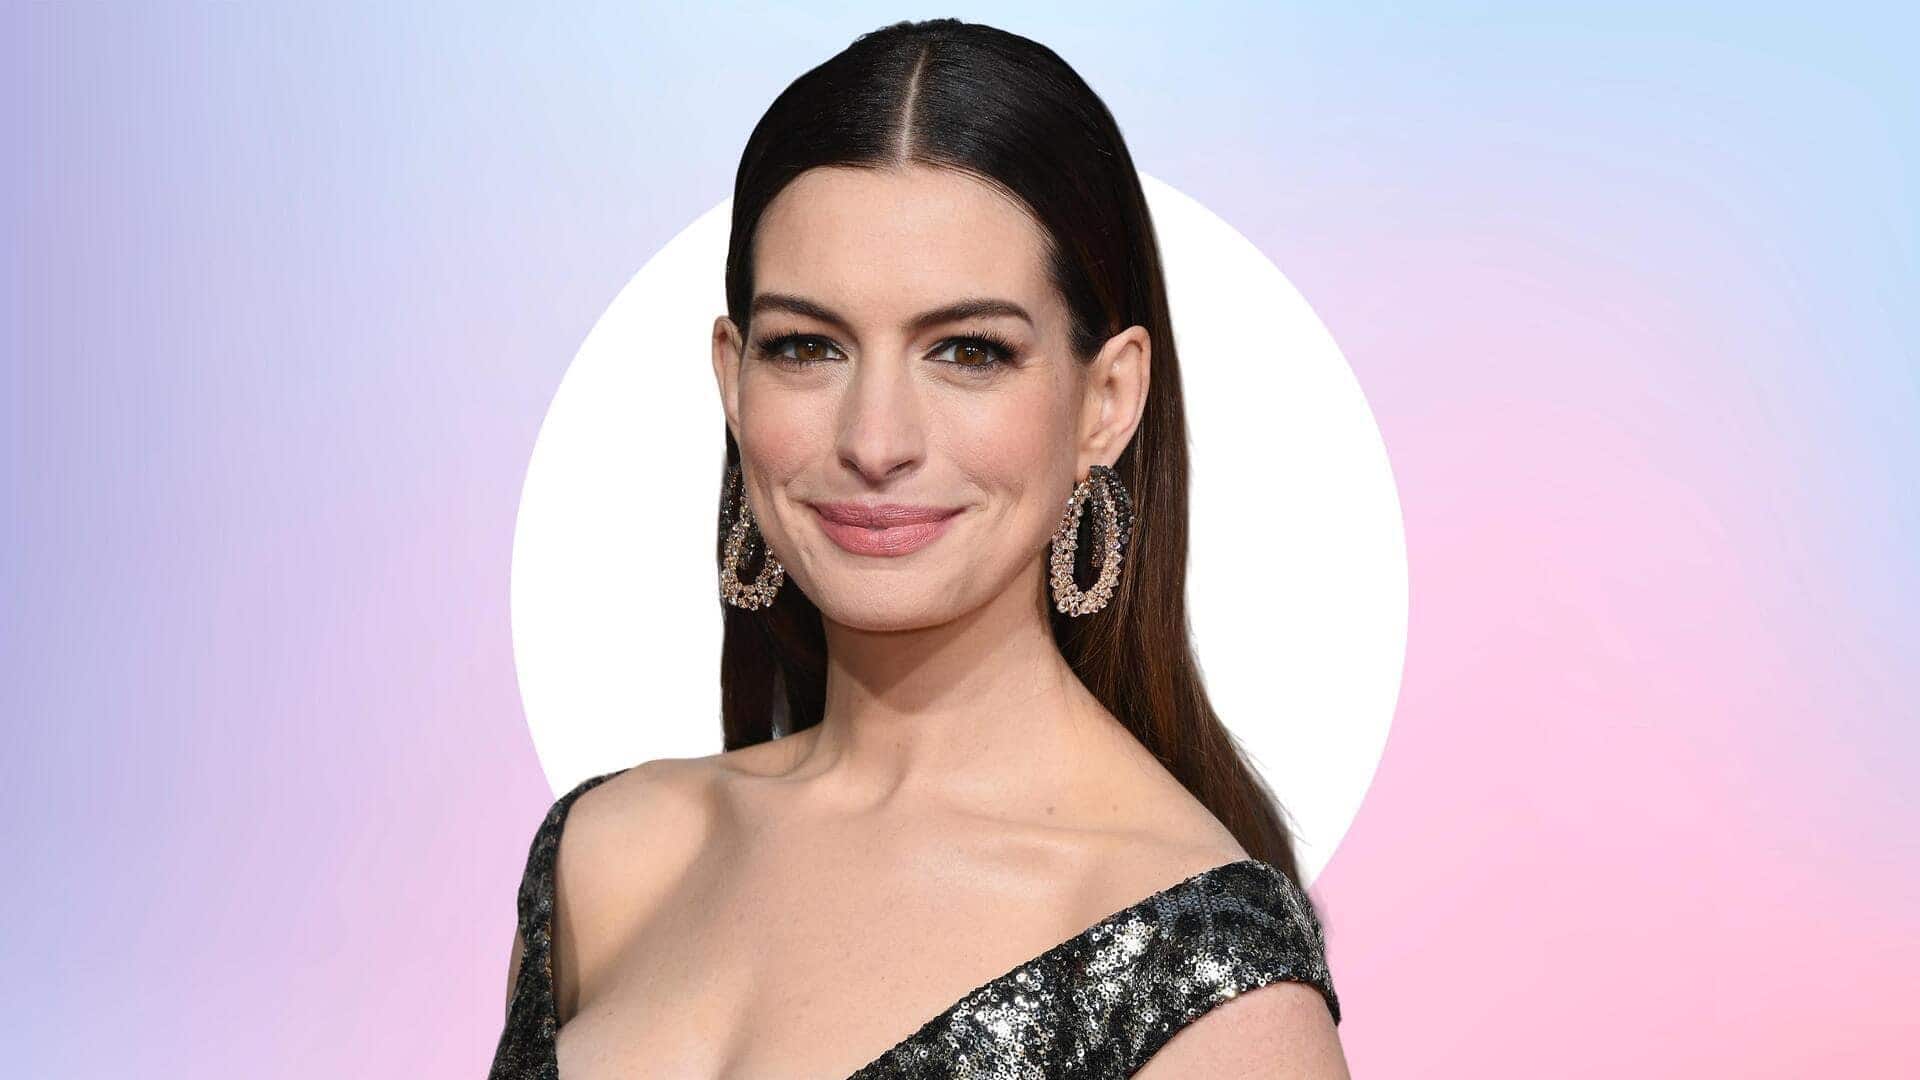 Why Anne Hathaway walked out of 'Vanity Fair' photoshoot? Explained